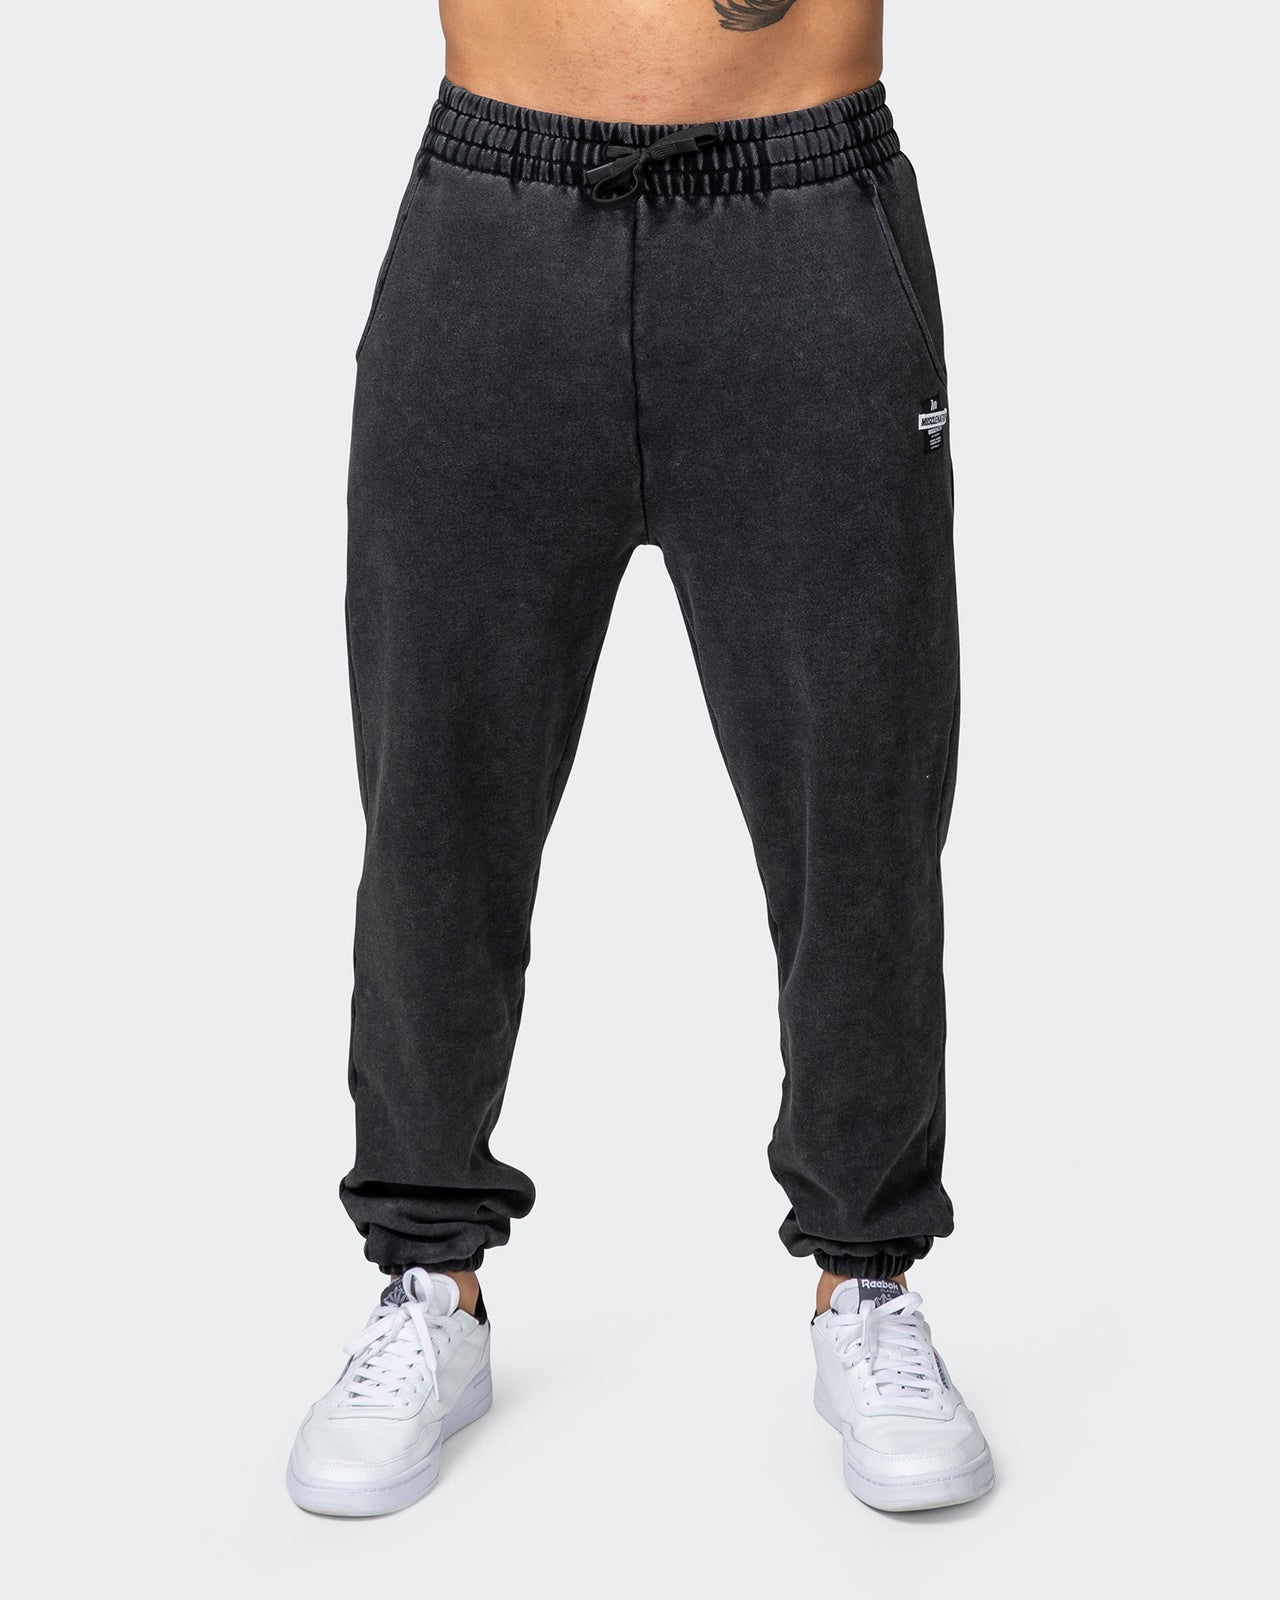 musclenation joggers Mens Slouchy Vintage Trackies - Washed Black